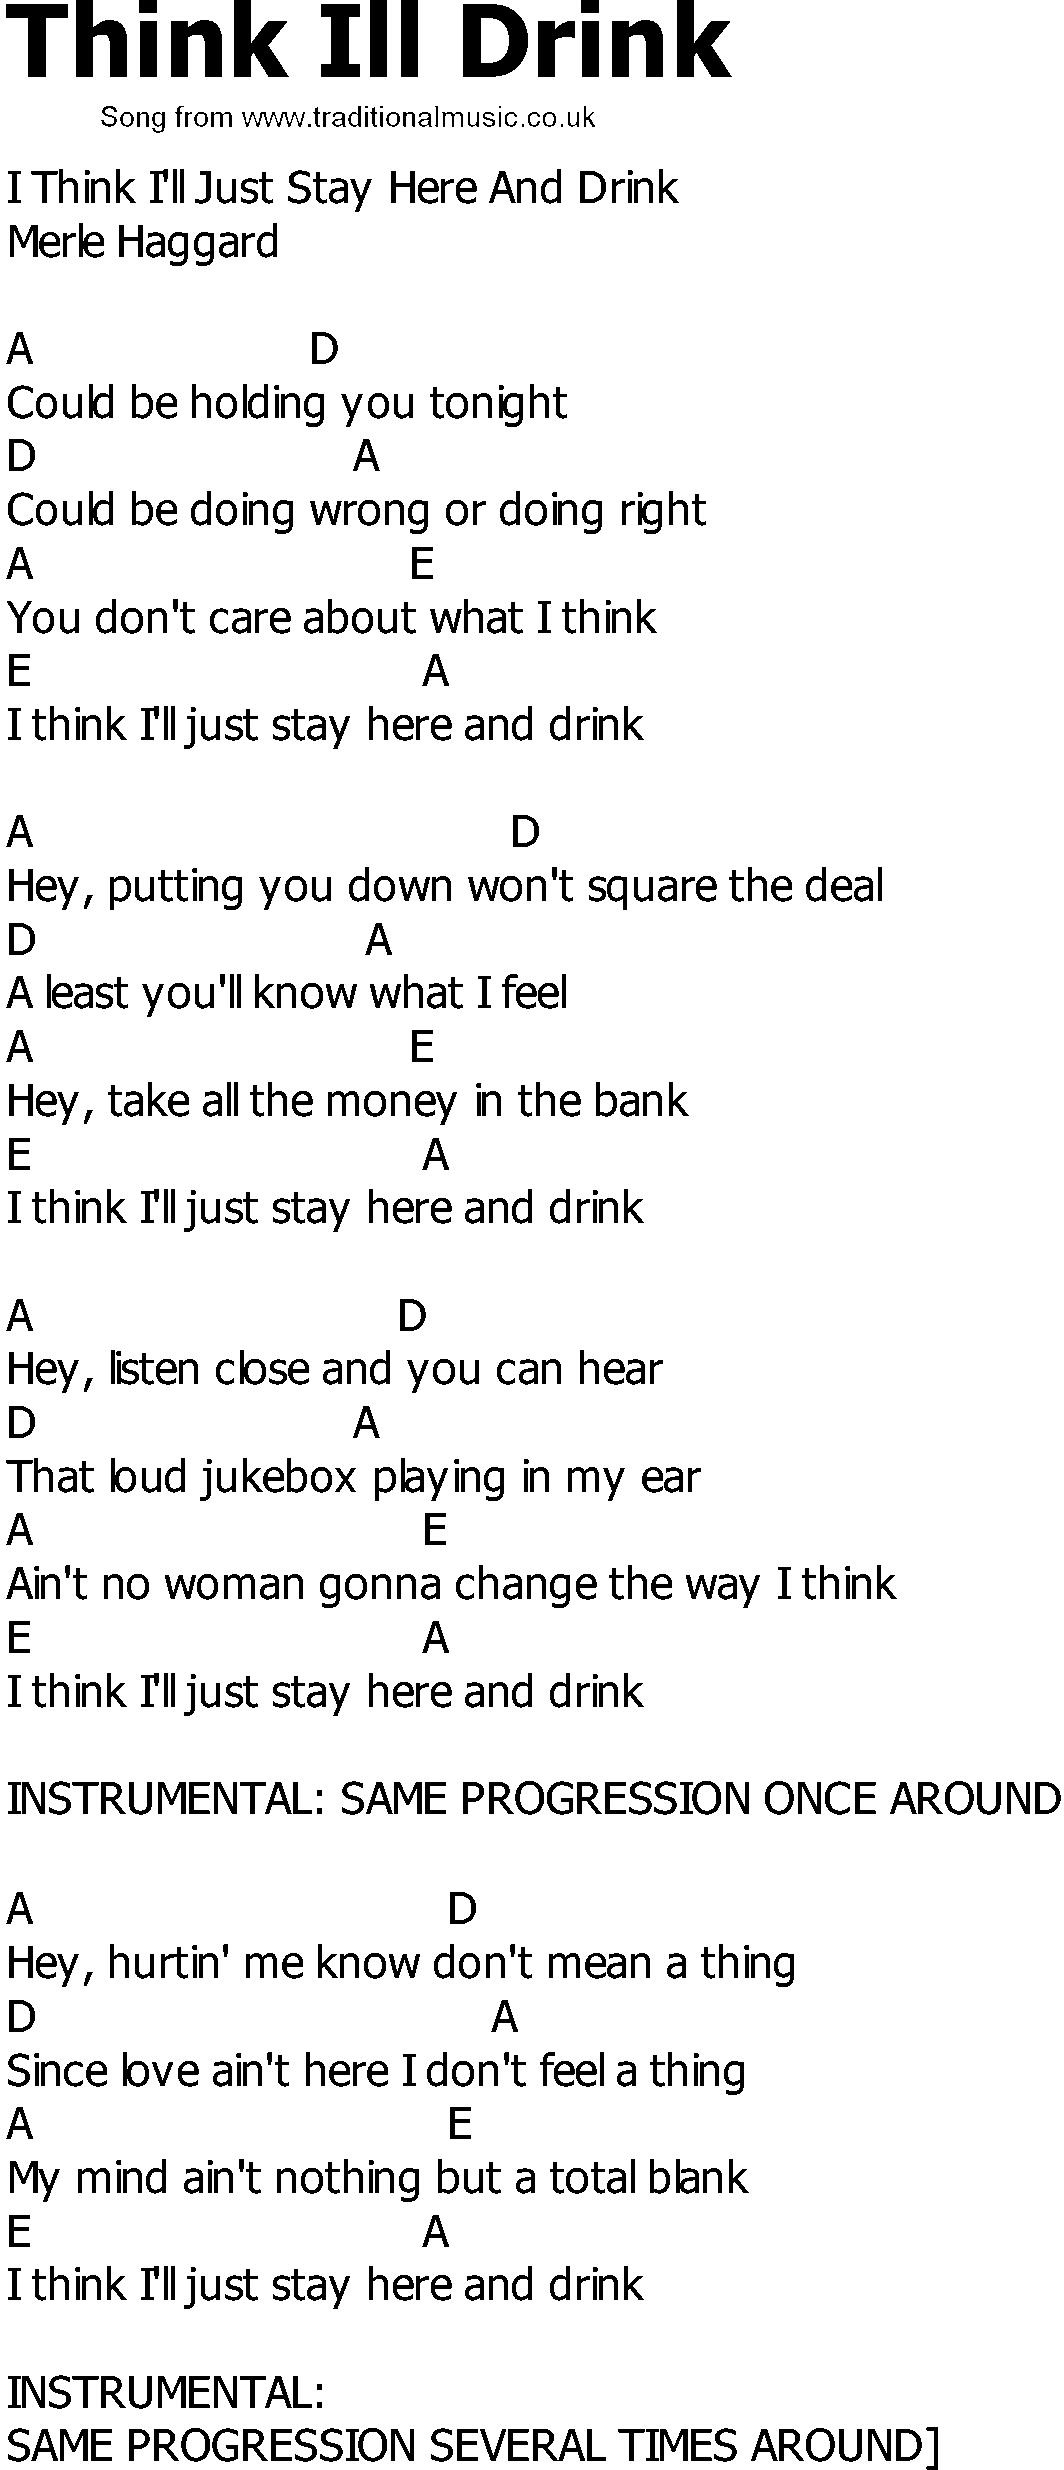 Old Country song lyrics with chords - Think Ill Drink